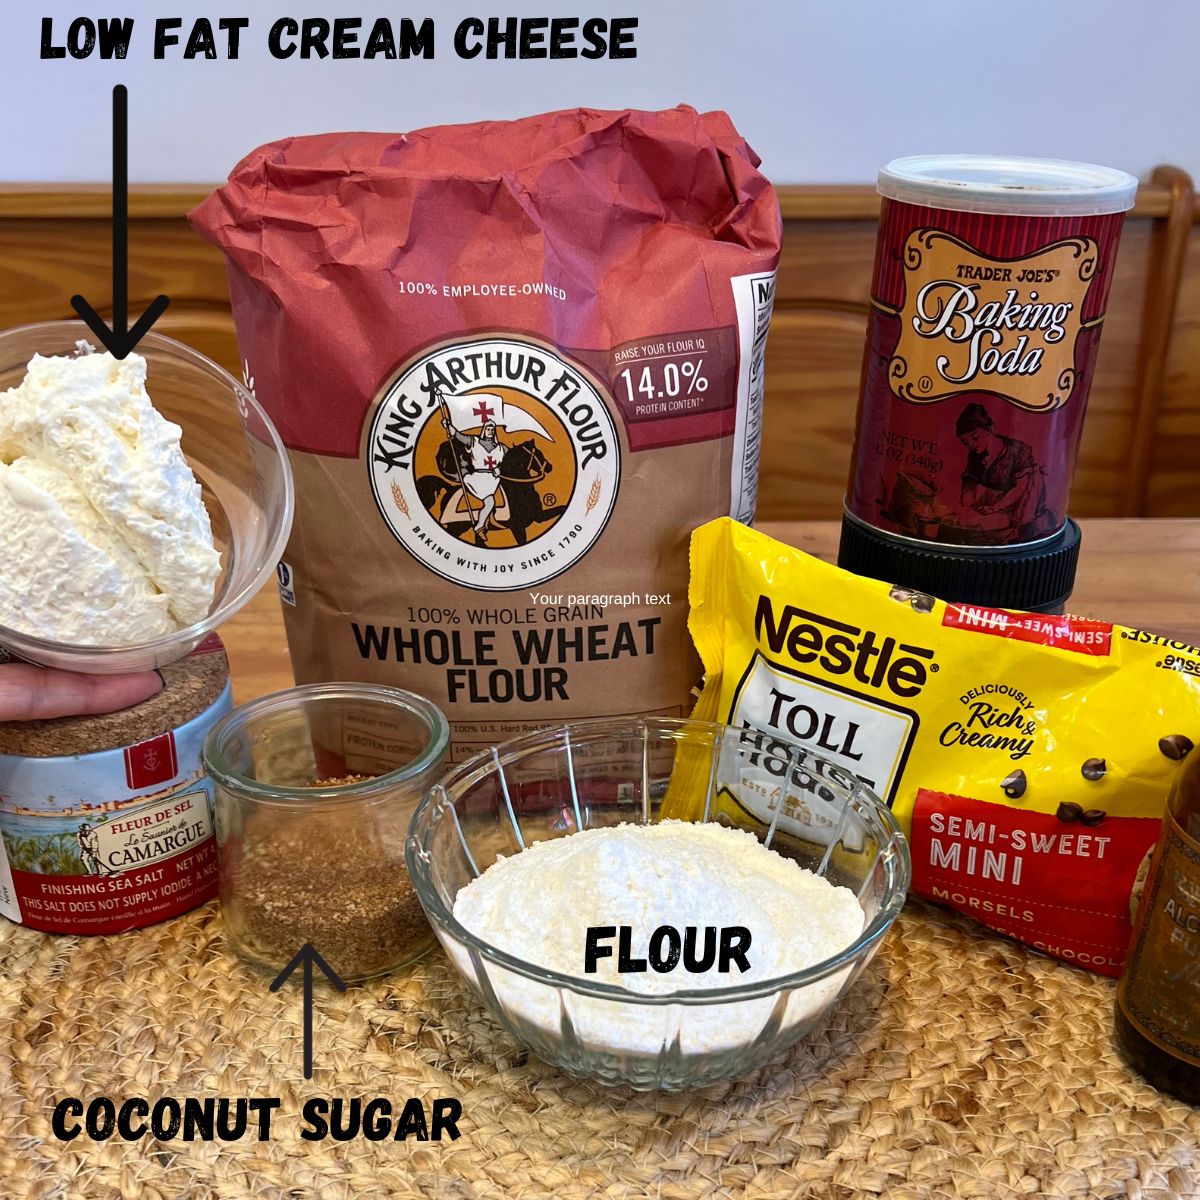 Cream cheese cookie ingredients - a bowl of low fat cream cheese, whole wheat flour in a bag, baking soda, sea salt, coconut sugar, flour and a bag of nestle's chocolate chips